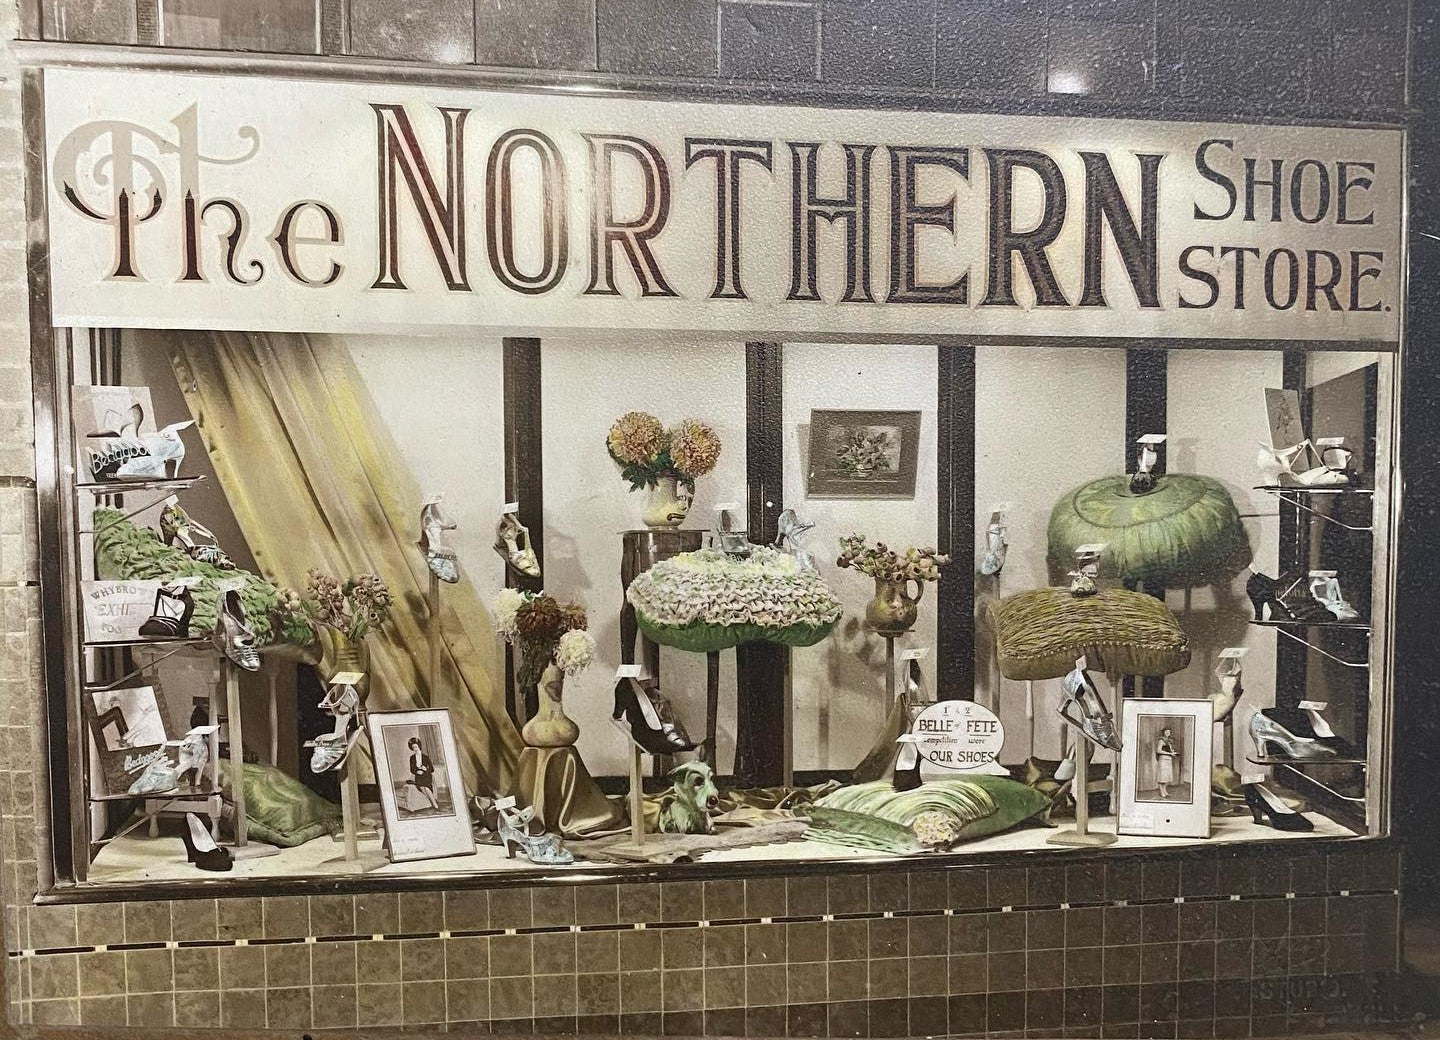 Northern Shoe Store shop window display from 1930